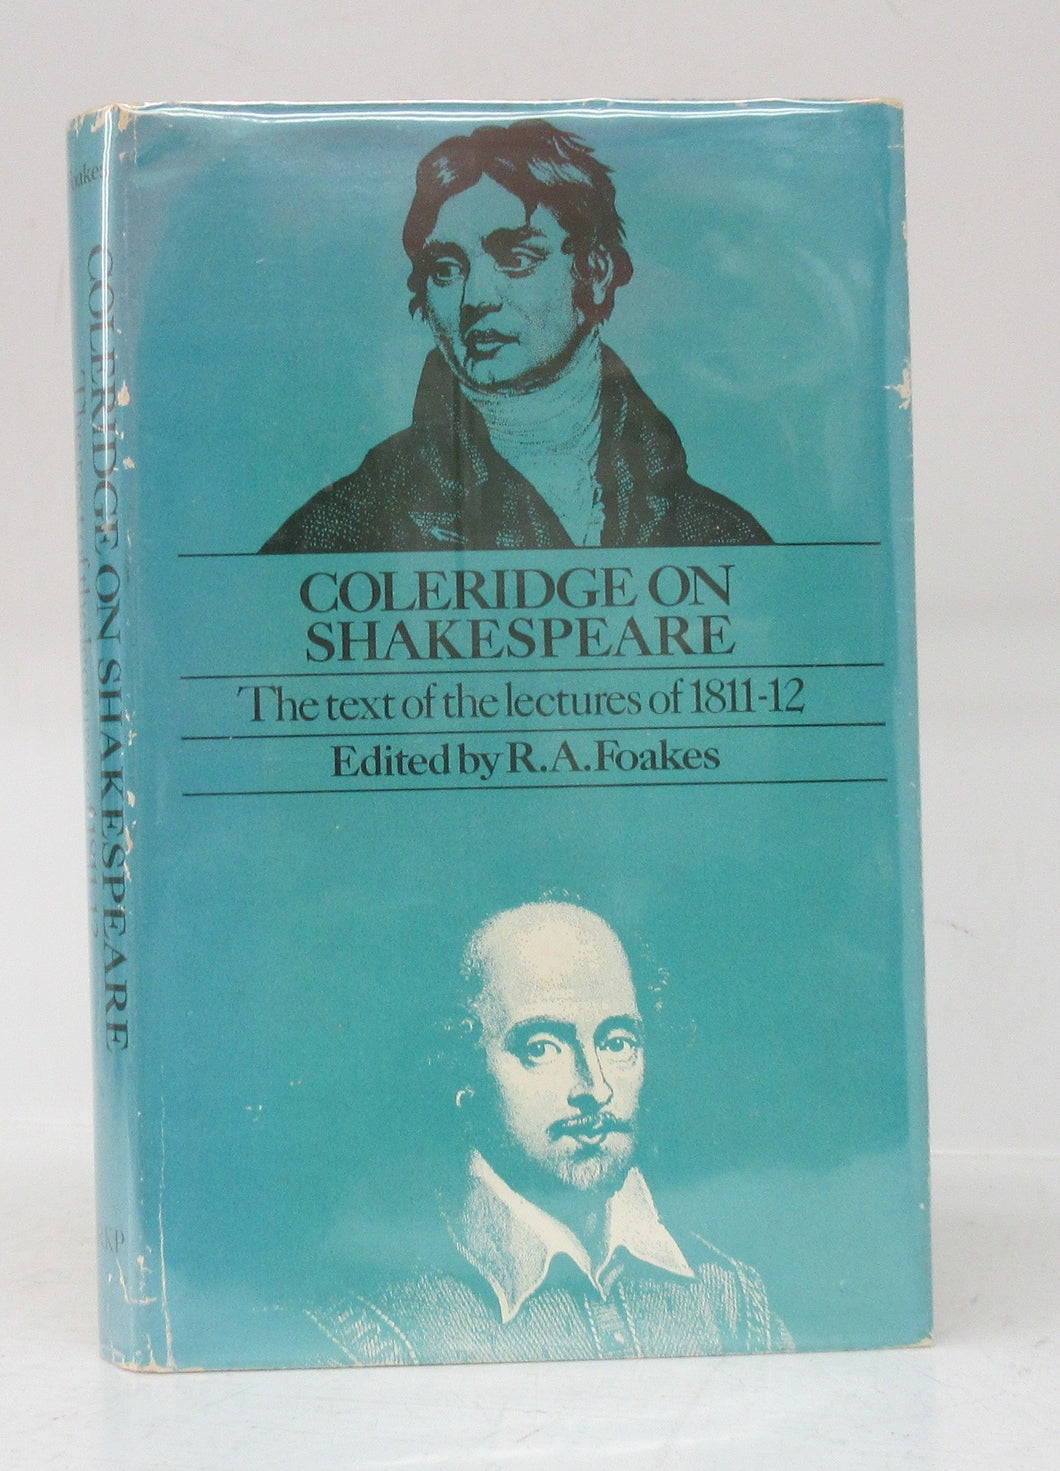 Coleridge on Shakespeare: The text of the lectures of 1811-12